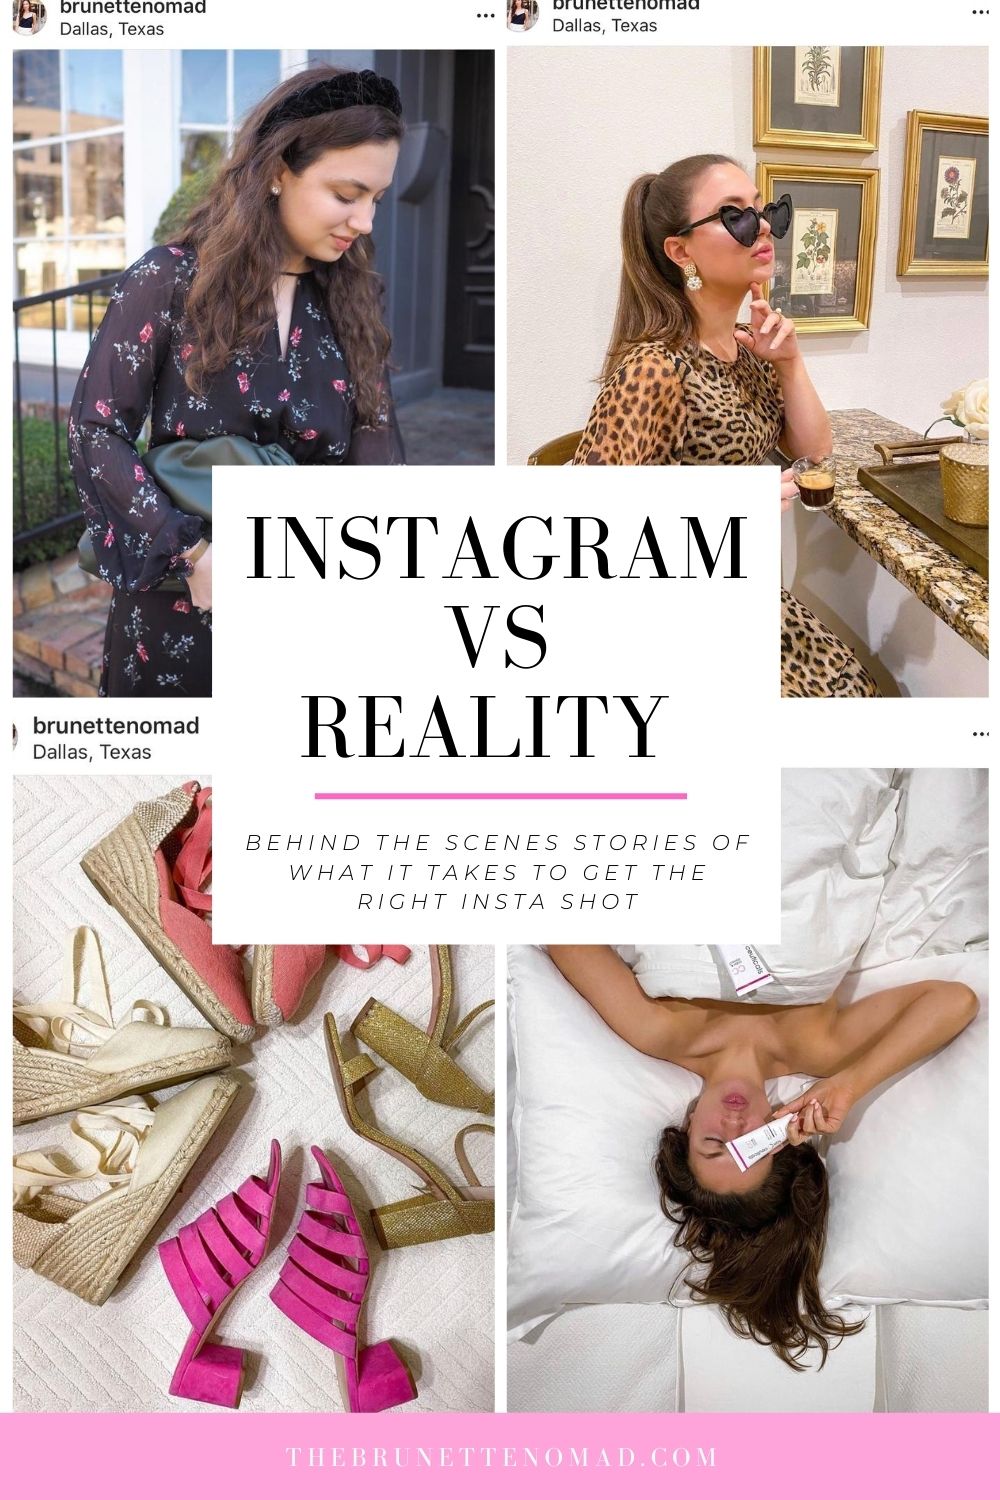 Dallas fashion blogger shares the instagram vs reality of her Instagram photos